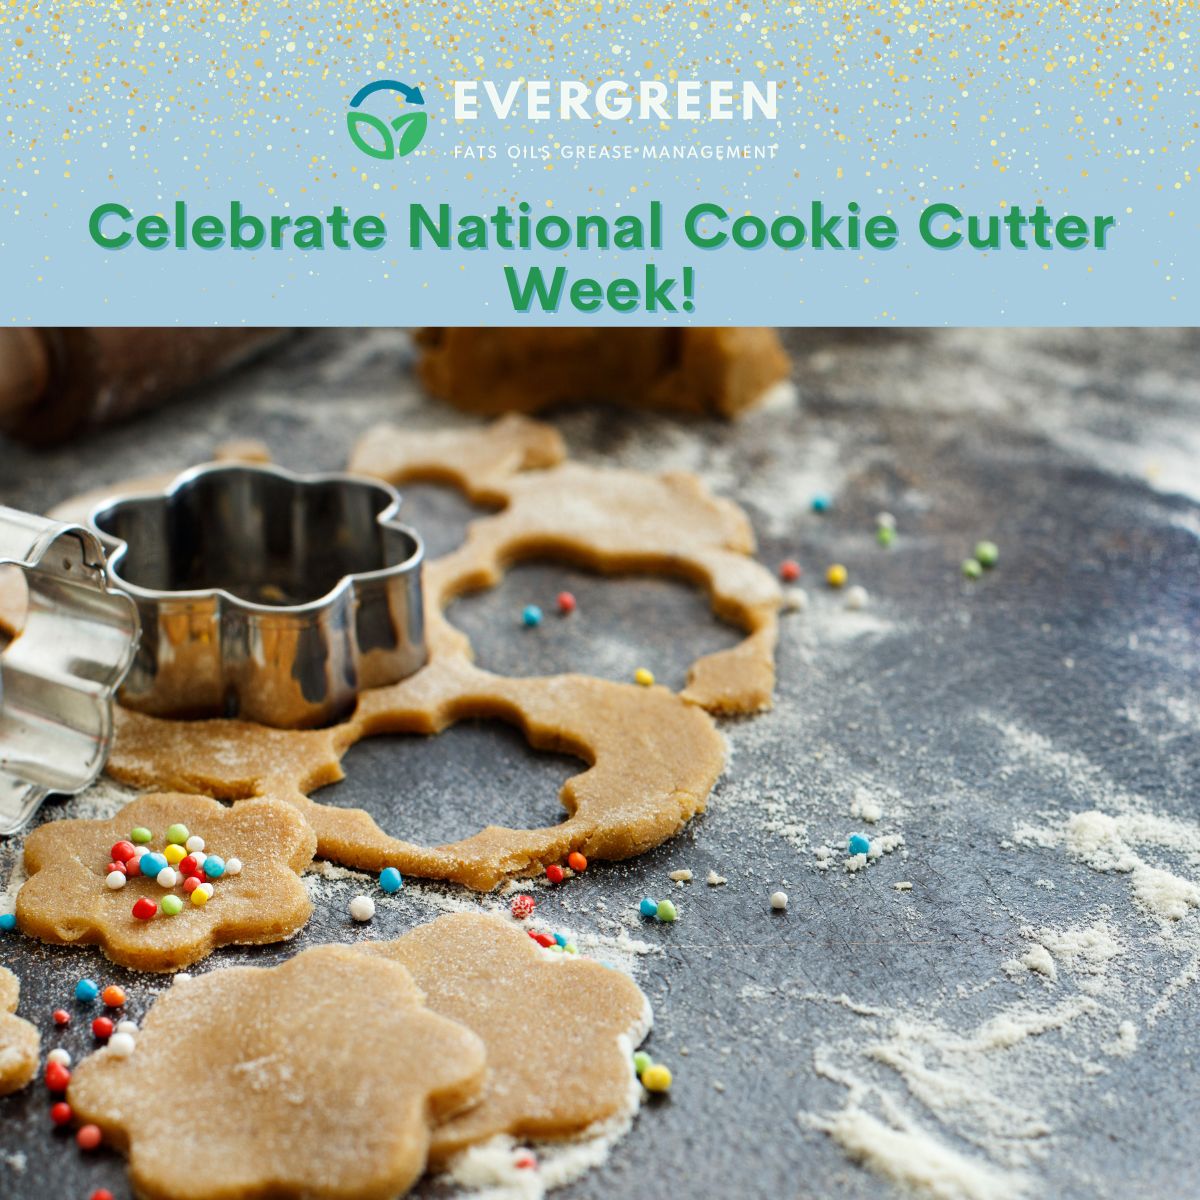 🍪 Celebrating National Cookie Cutter Week amidst the hustle of bakery season! Protect your kitchen's magic with Evergreen Grease Service - where precision meets passion. #NationalCookieCutterWeek #BakeryLife #KitchenSafety